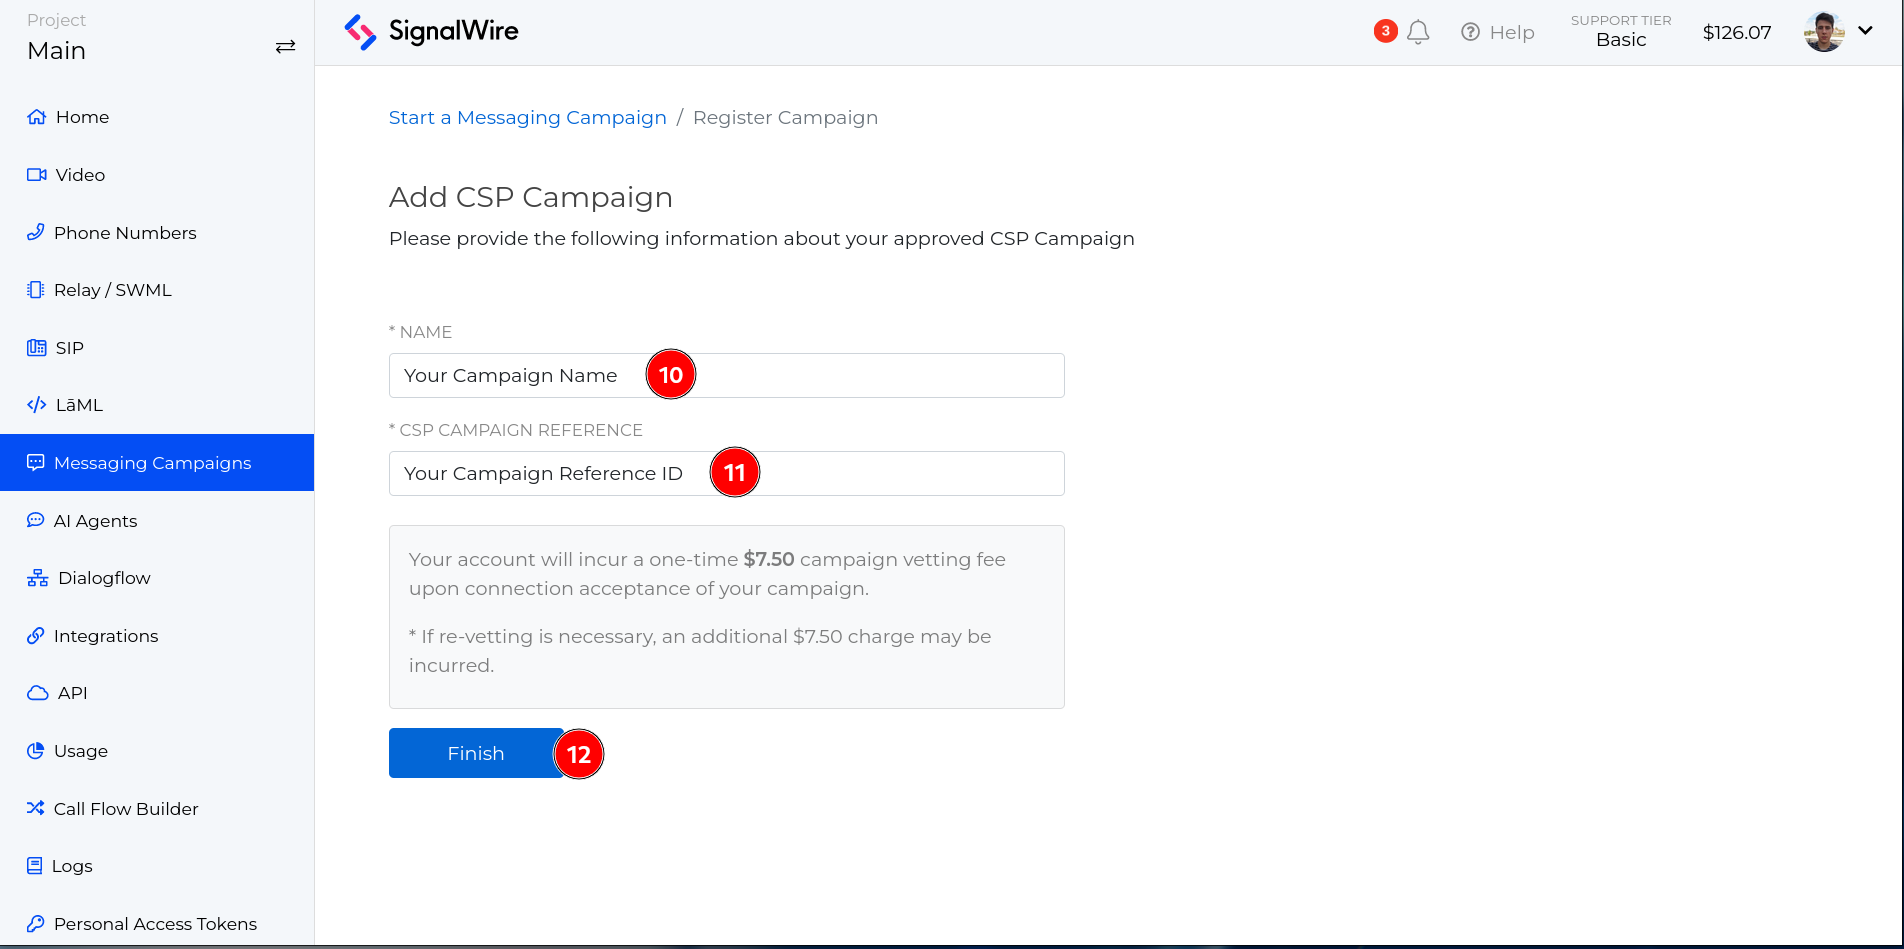 A screenshot of the Add CSP Campaign page. The user can add the name of the Campaign and the Reference ID, and then click the Blue button to finish adding the campaign.